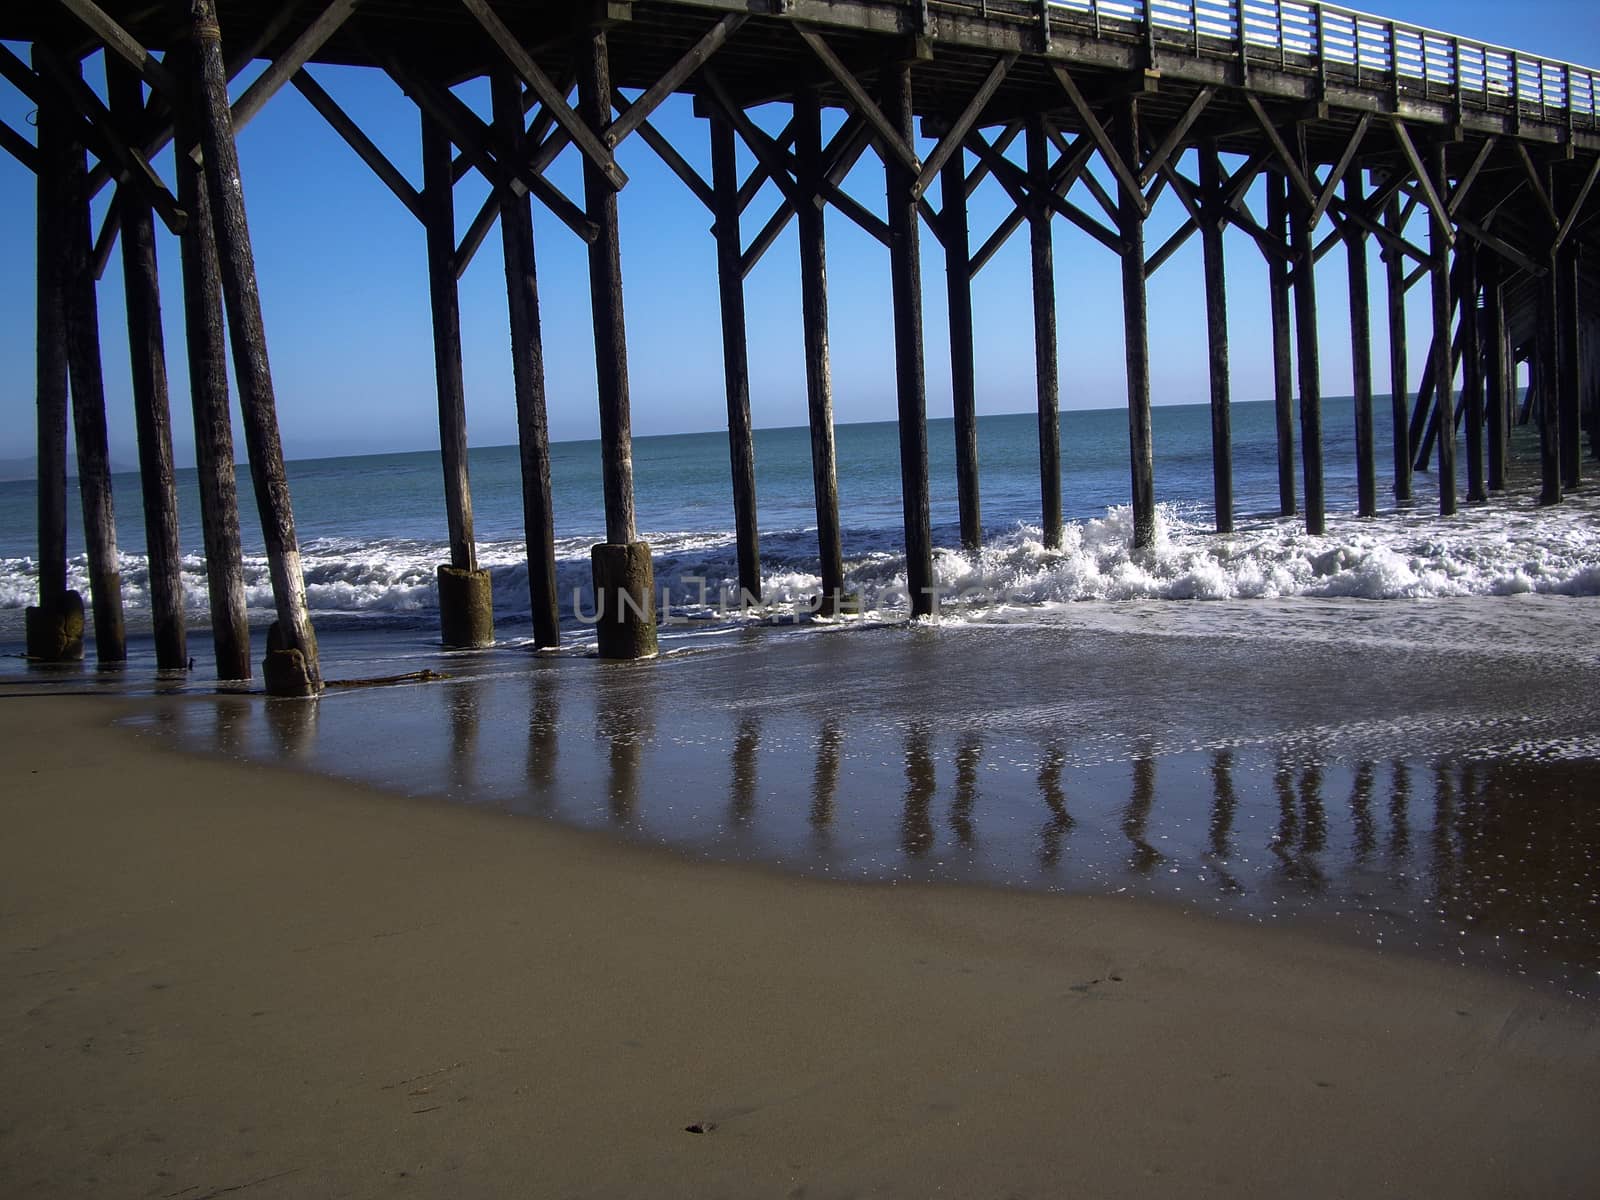 Wooden structure of pier in California by emattil